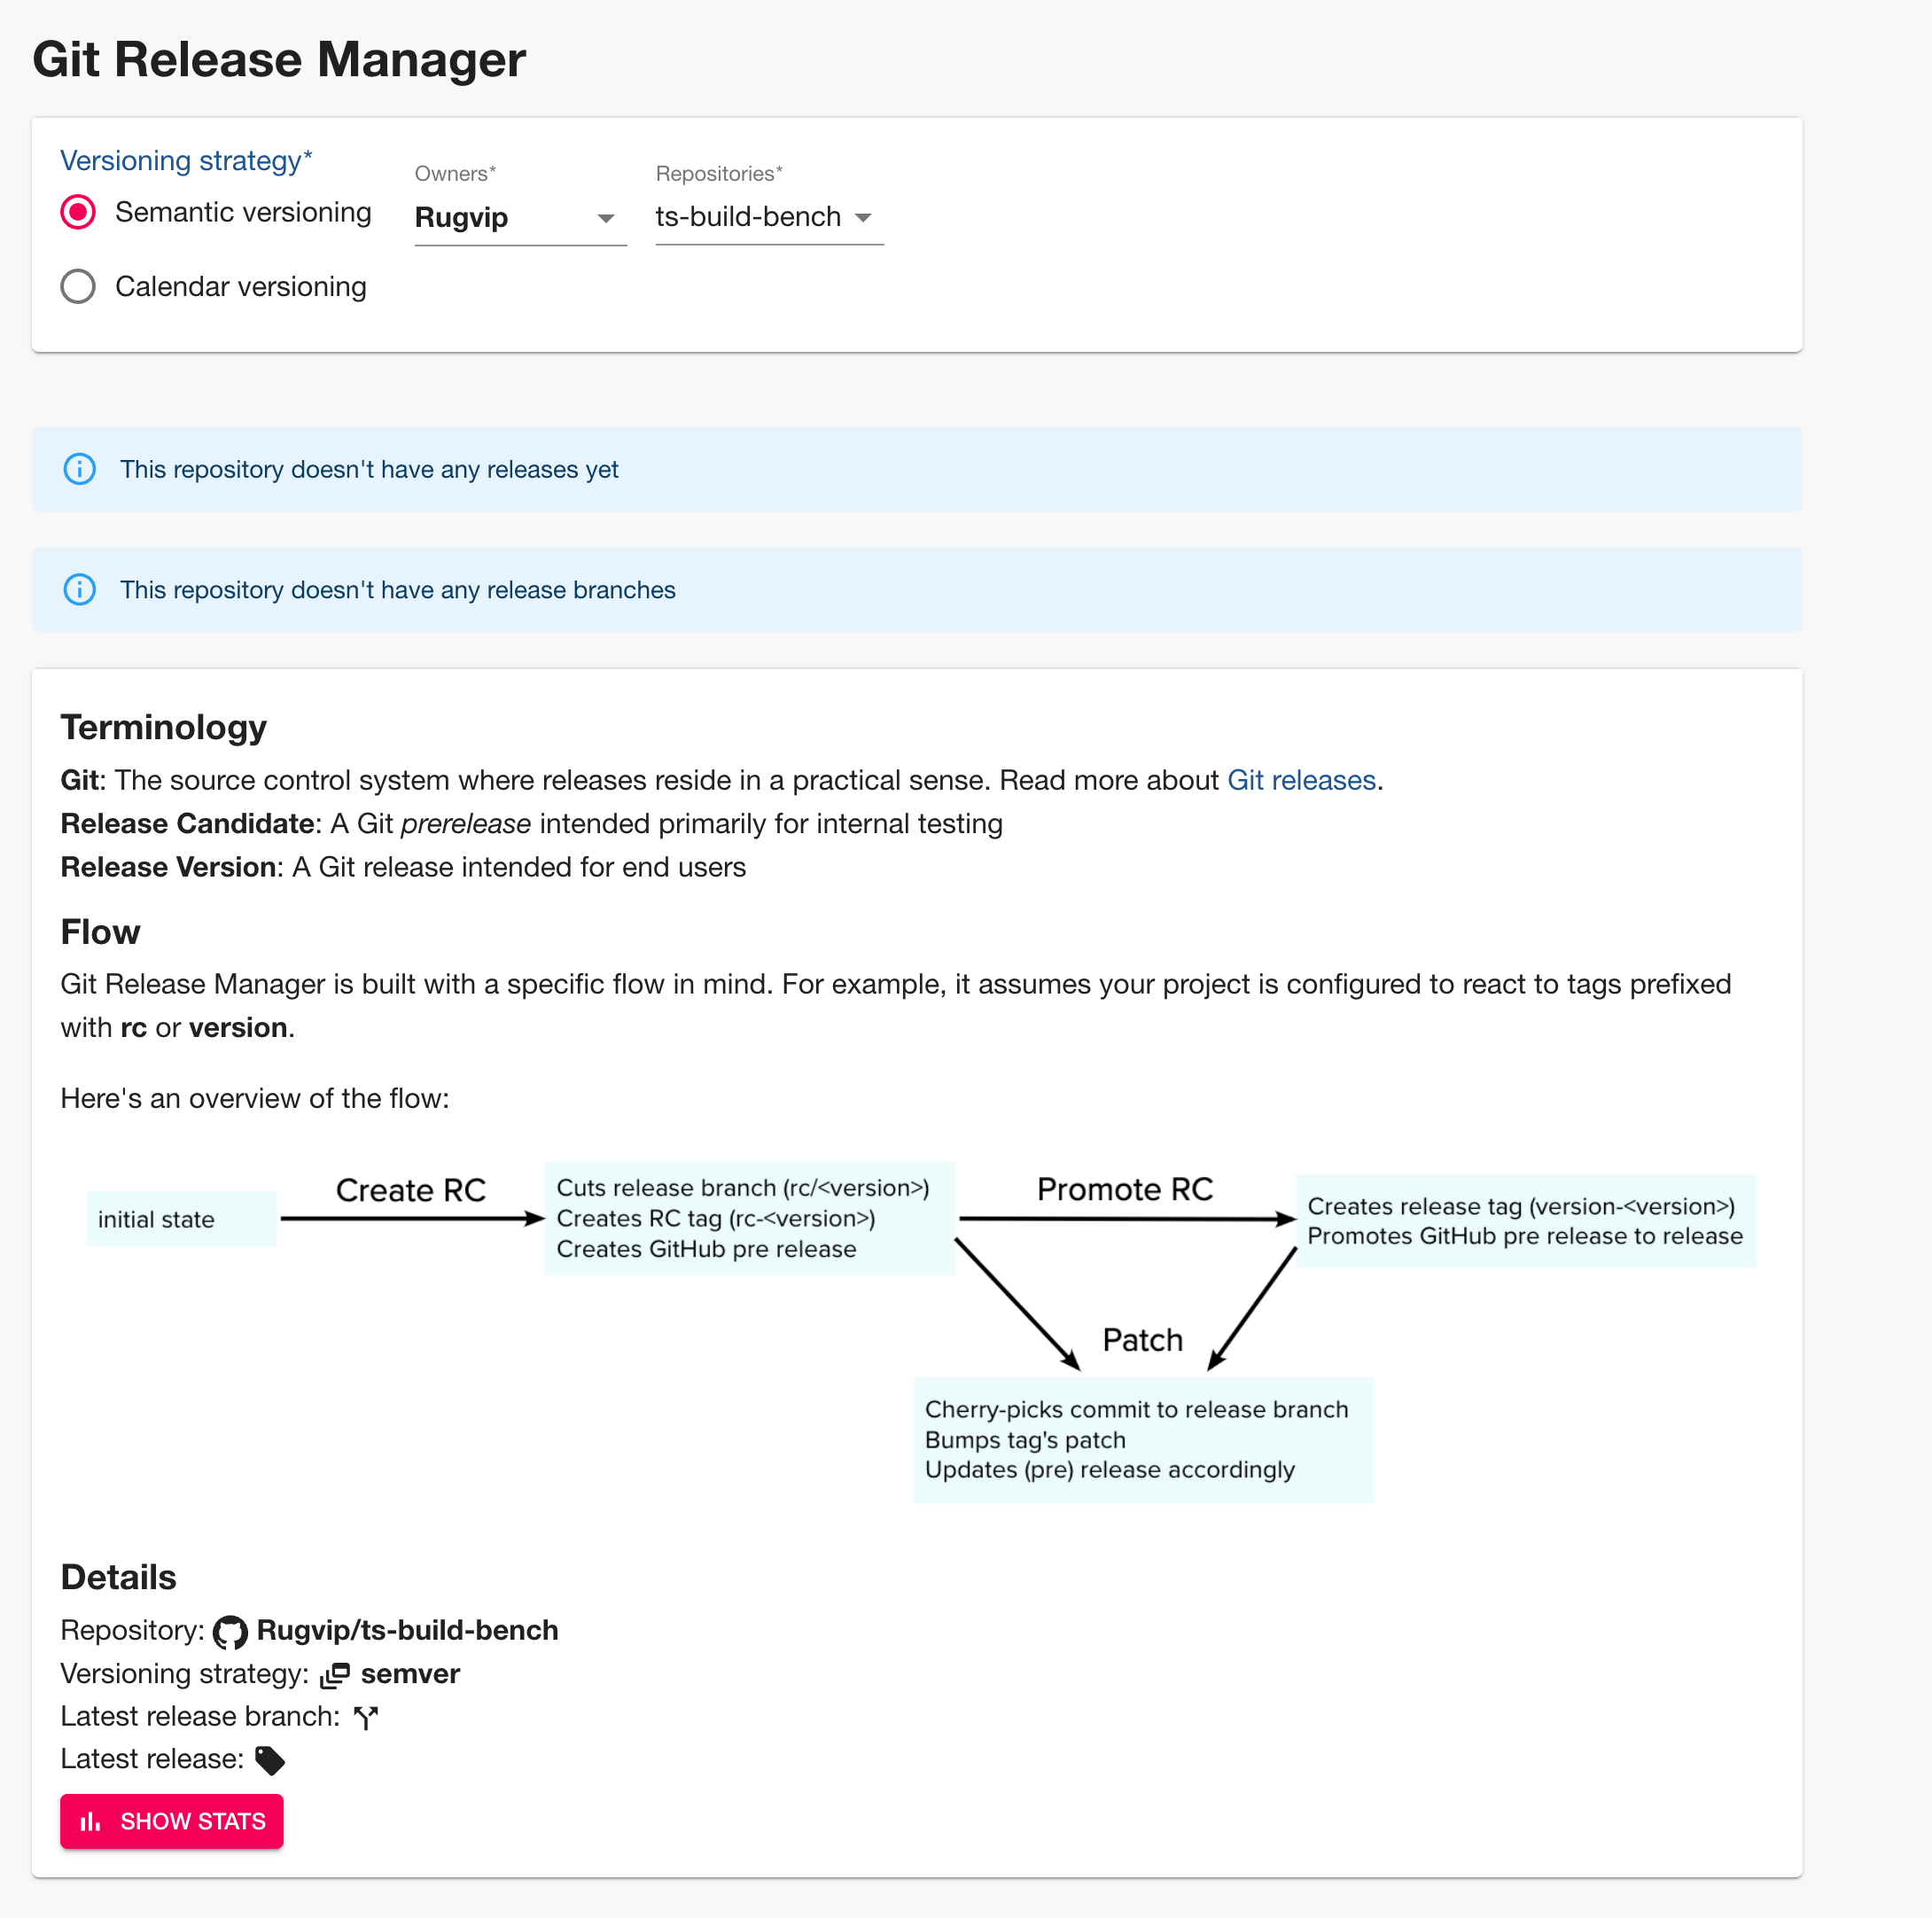 Example view of managing release strategy with this plugin. Choose between semantic and calendar versioning, then choose an owner or owners and a repository. There are warnings that the example repository doesn't have any releases or release branches yet. The bottom of the image is a glossary of release candidate terminology.